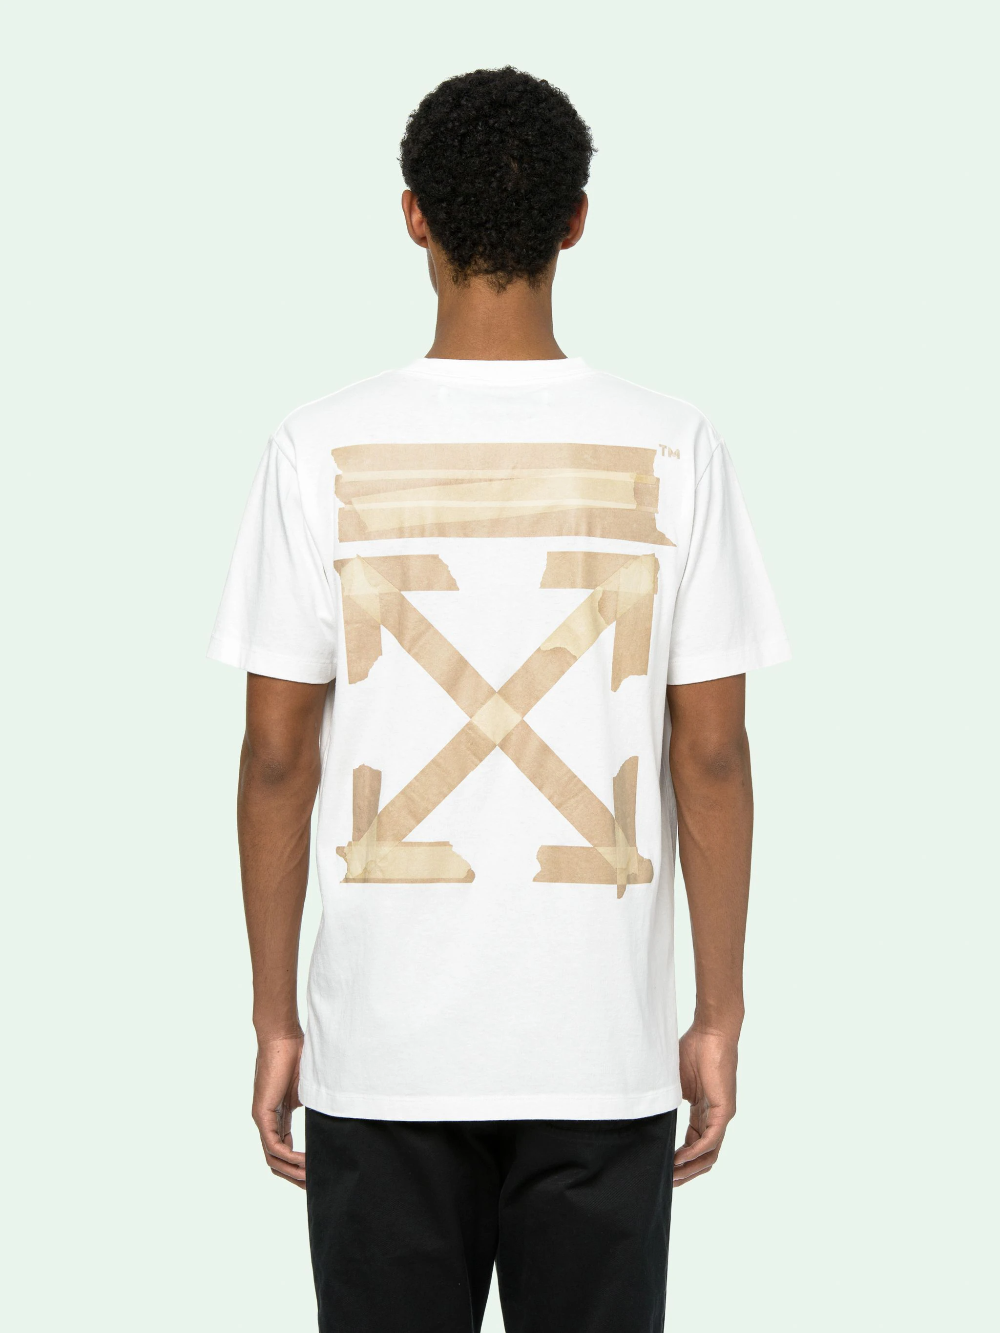 Off-White Tape Arrows White T-Shirt | Hype Vault Kuala Lumpur | Asia's Top Trusted High-End Sneakers and Streetwear Store